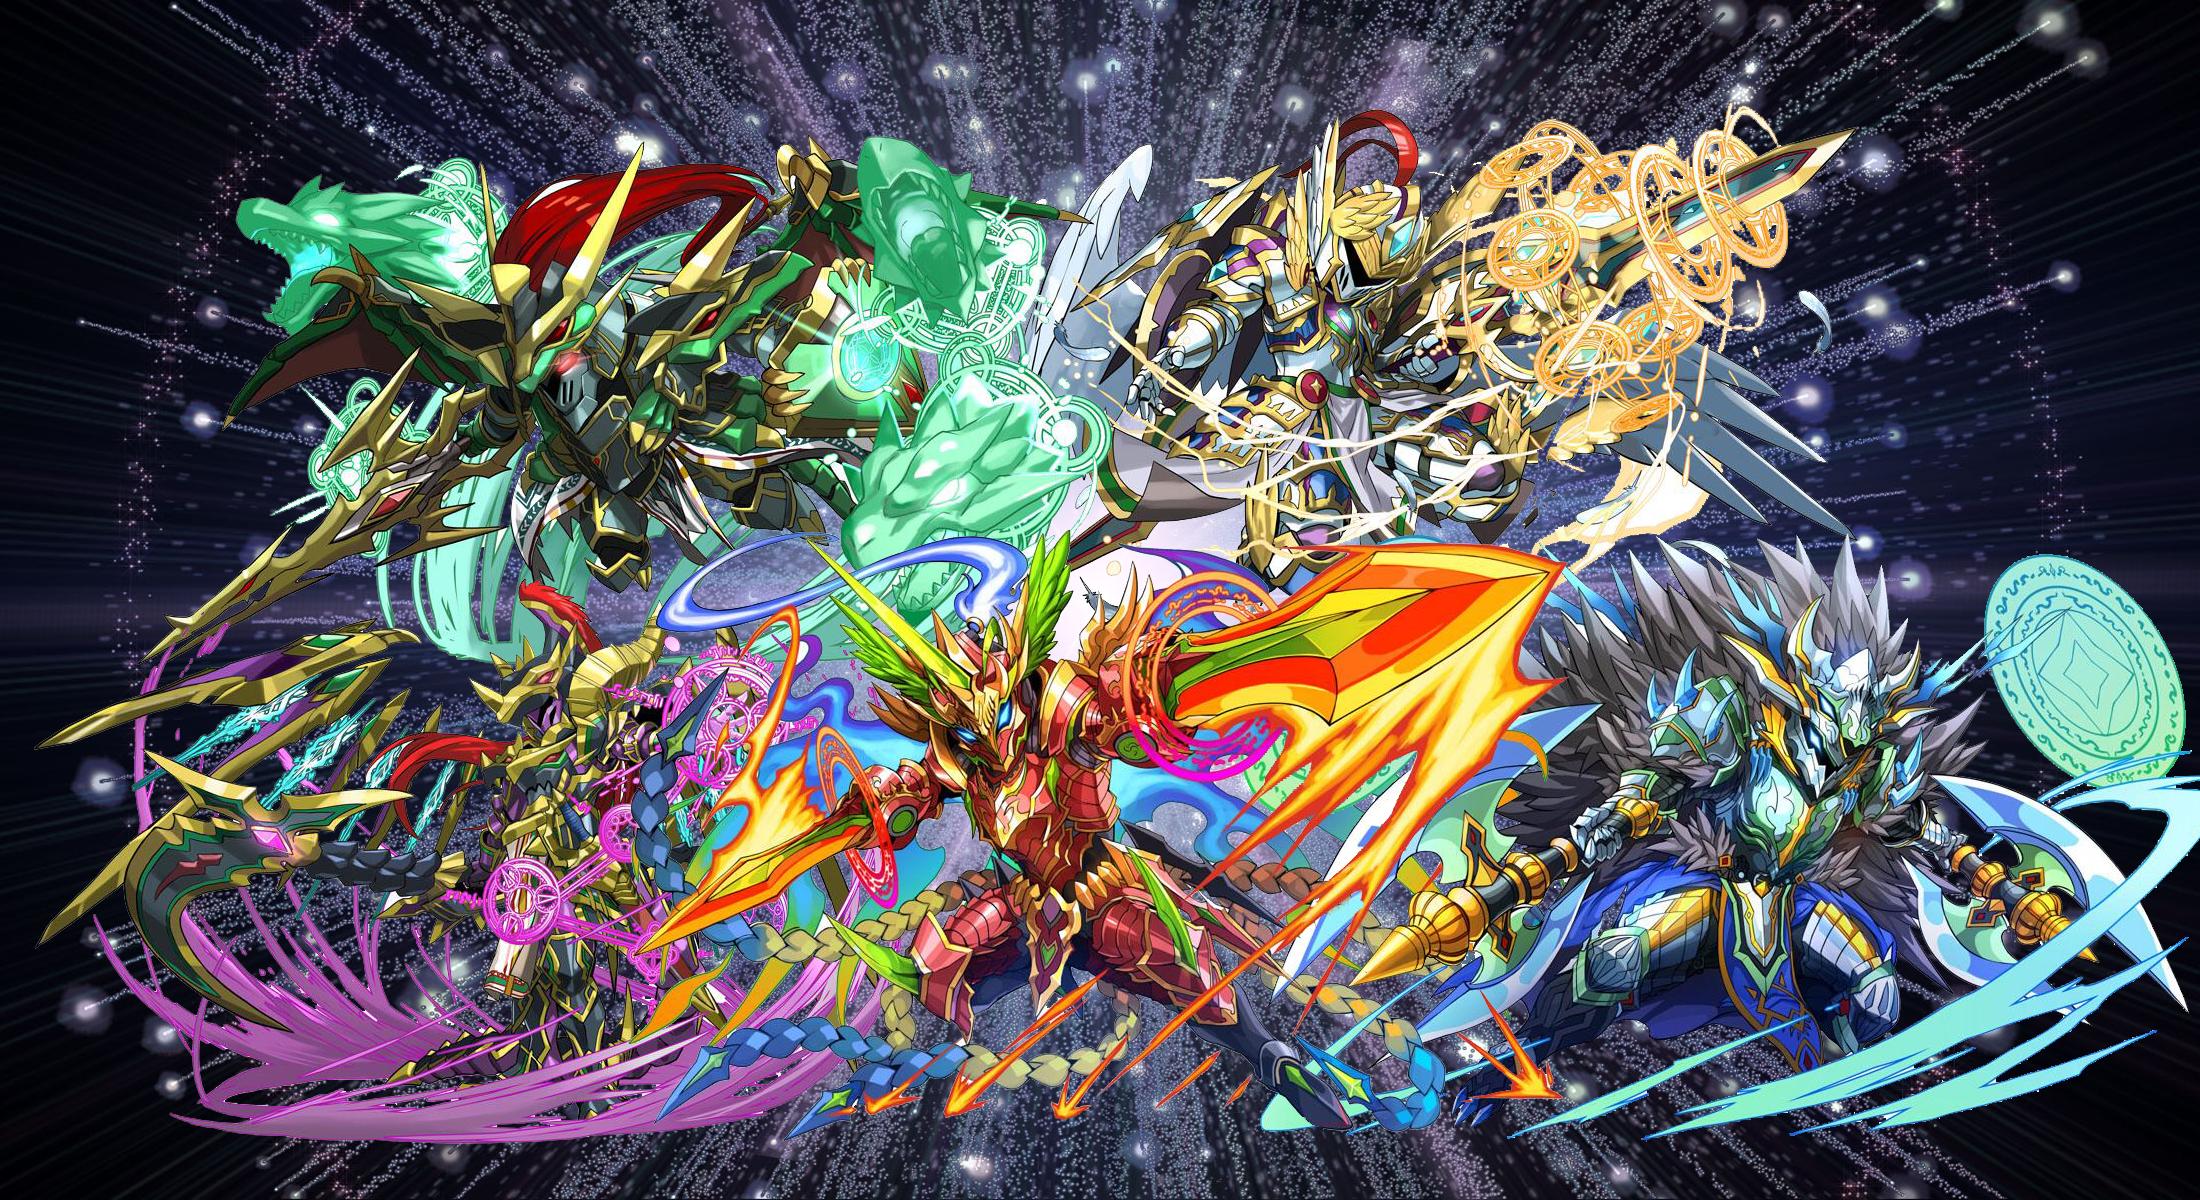 puzzle and dragons wallpaper,graphic design,illustration,graphics,fictional character,art